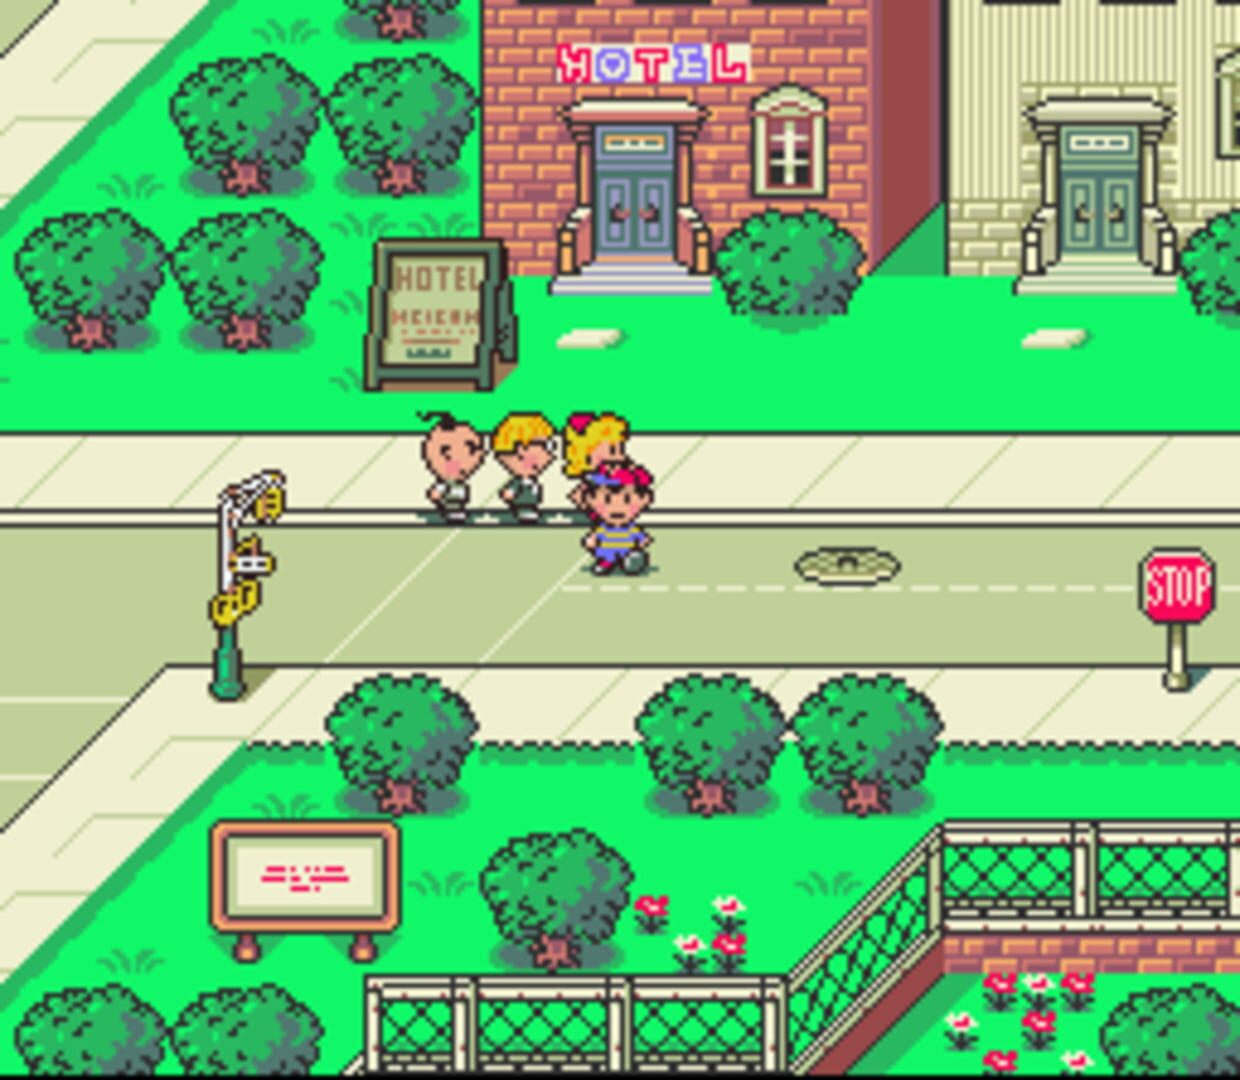 Mother 1 game. Earthbound (игра). Mother 2 Earthbound. Earthbound 1994. Earthbound super Famicom.